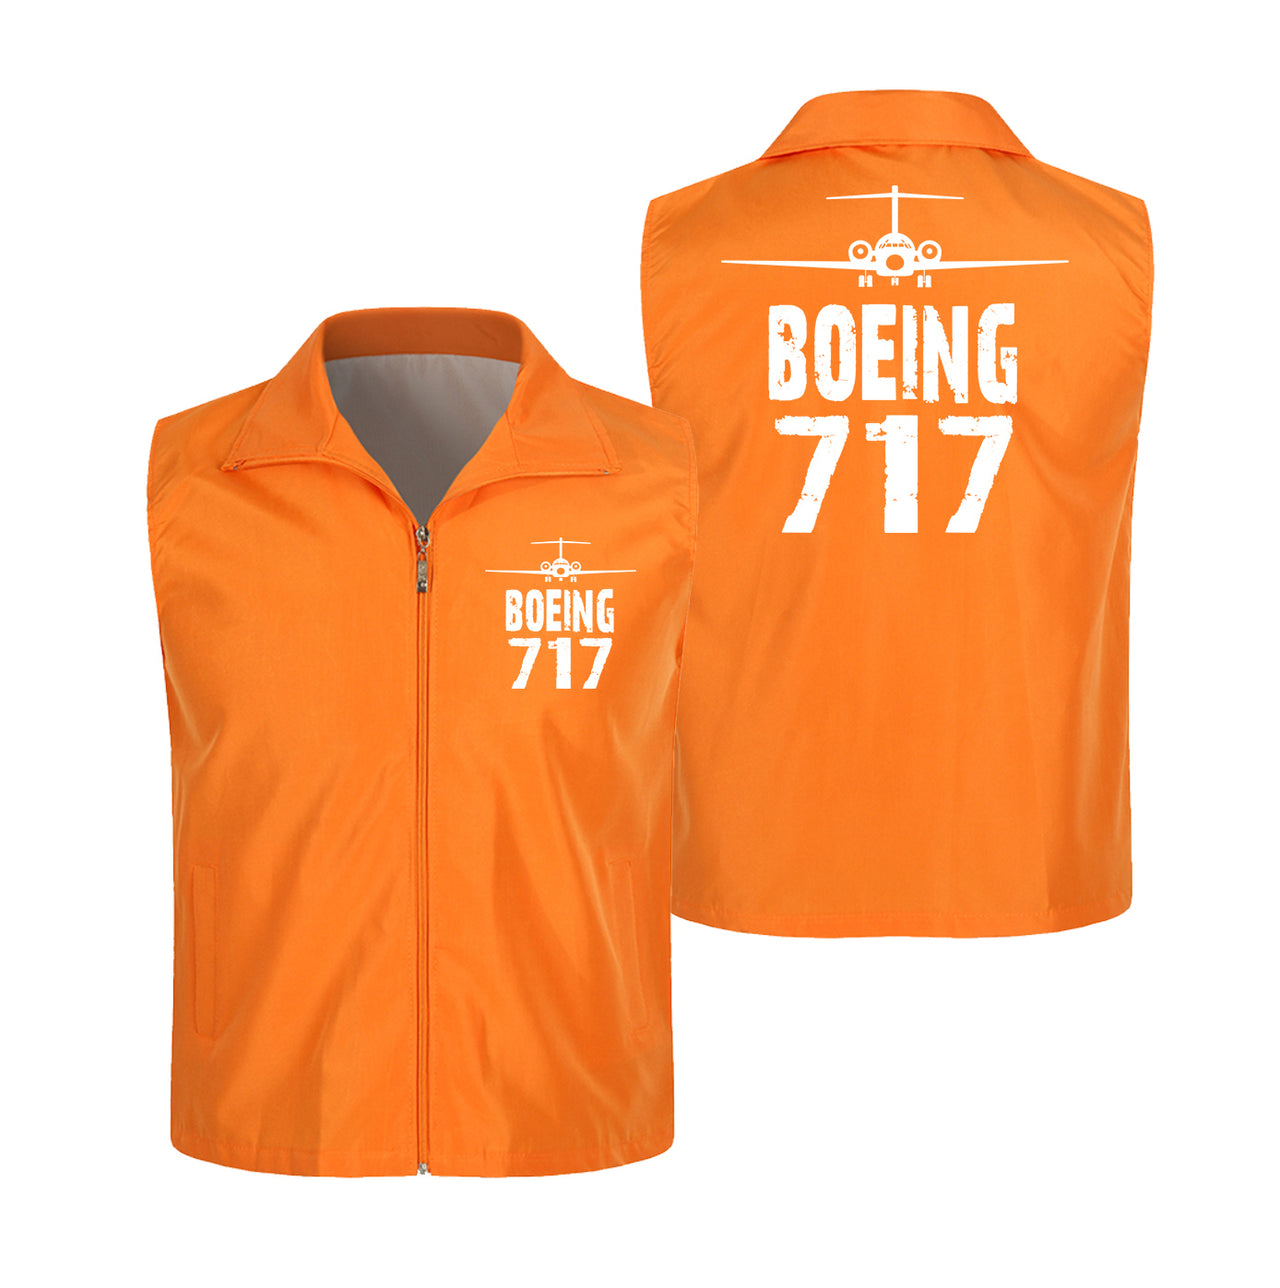 Boeing 717 & Plane Designed Thin Style Vests